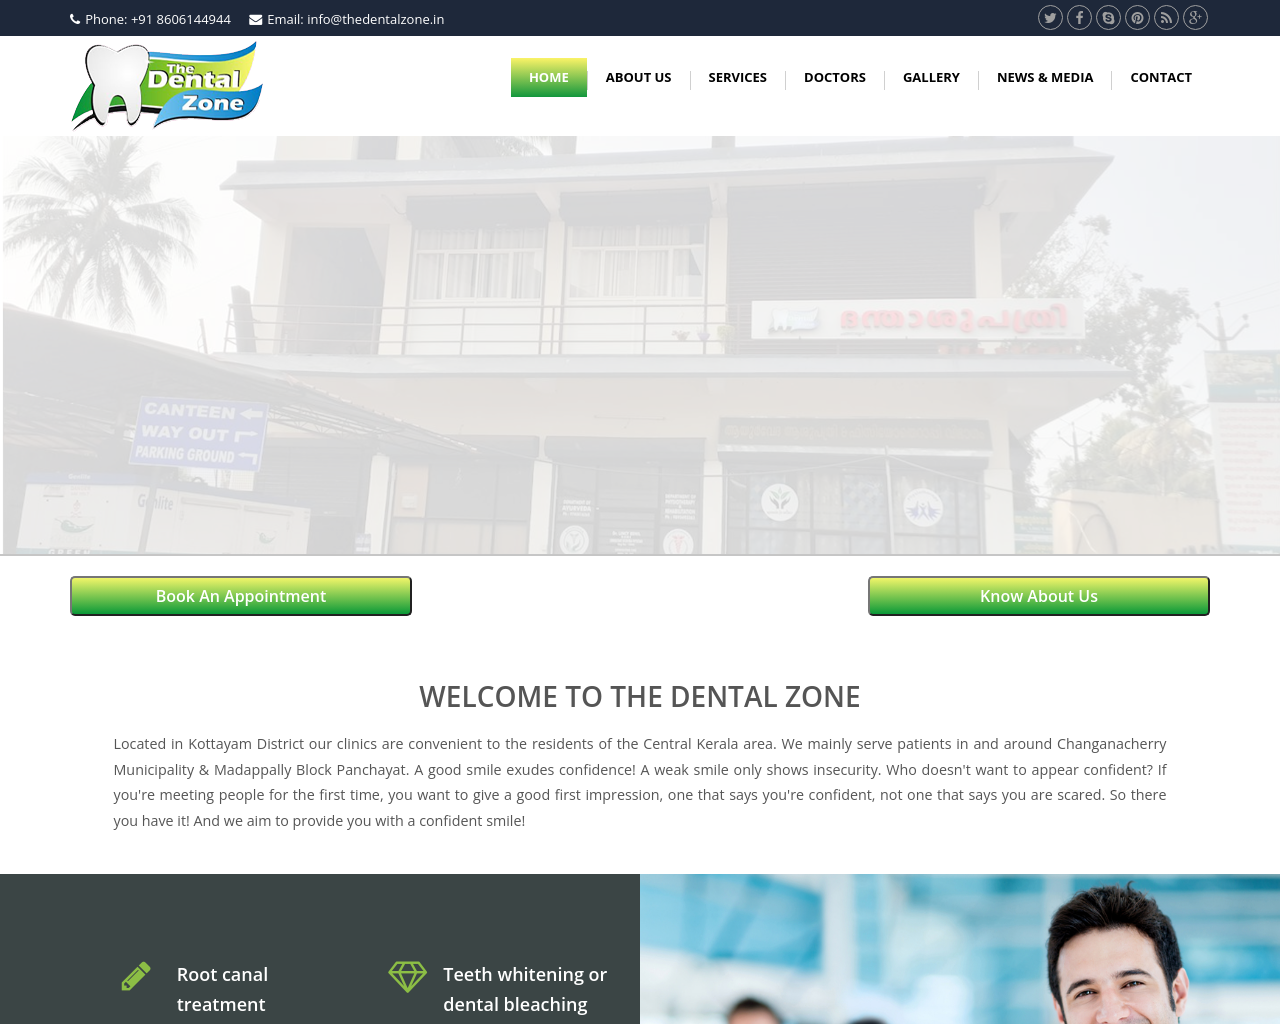 thedentalzone.in